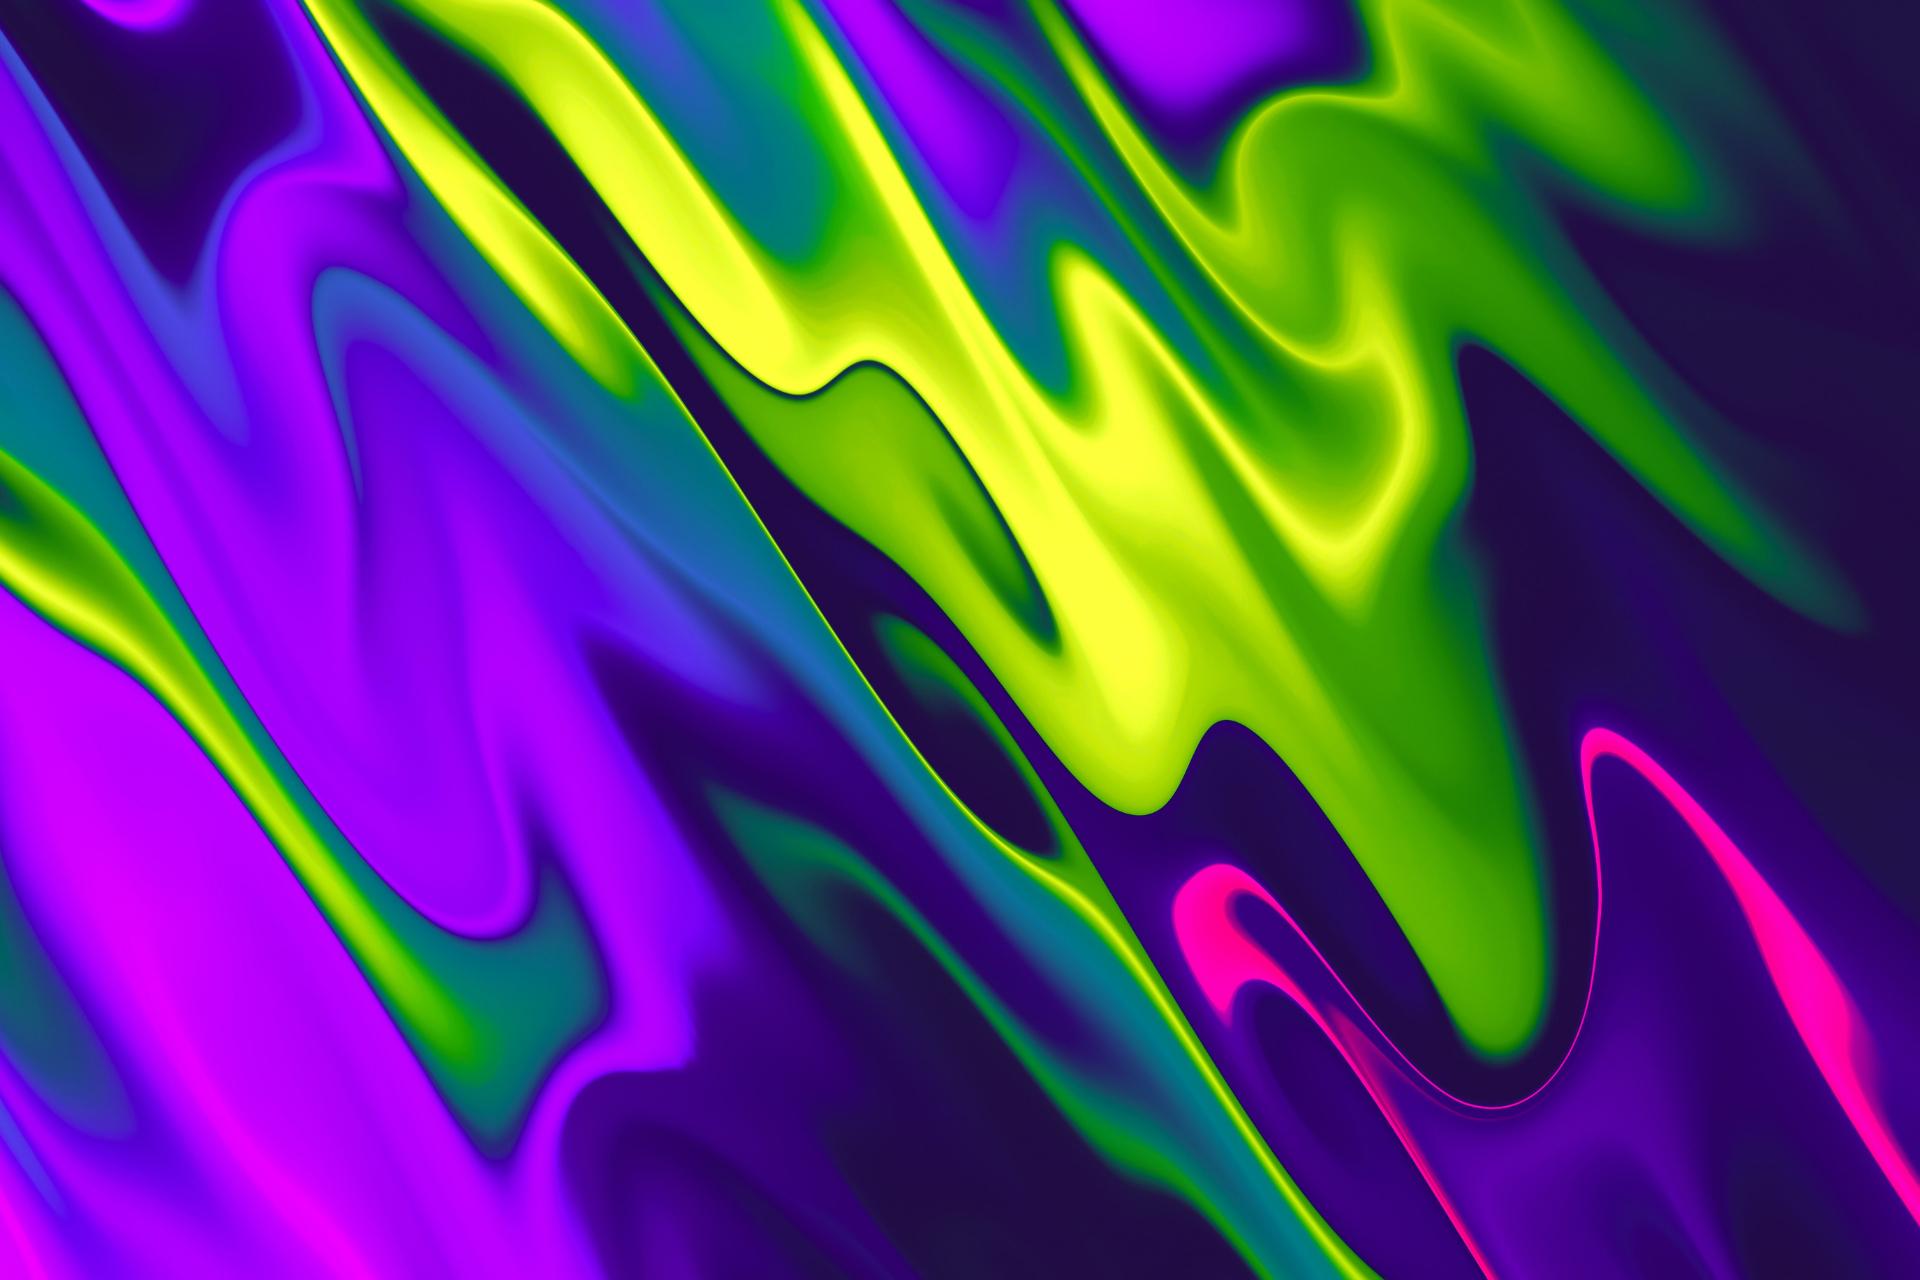 Colorful abstract image